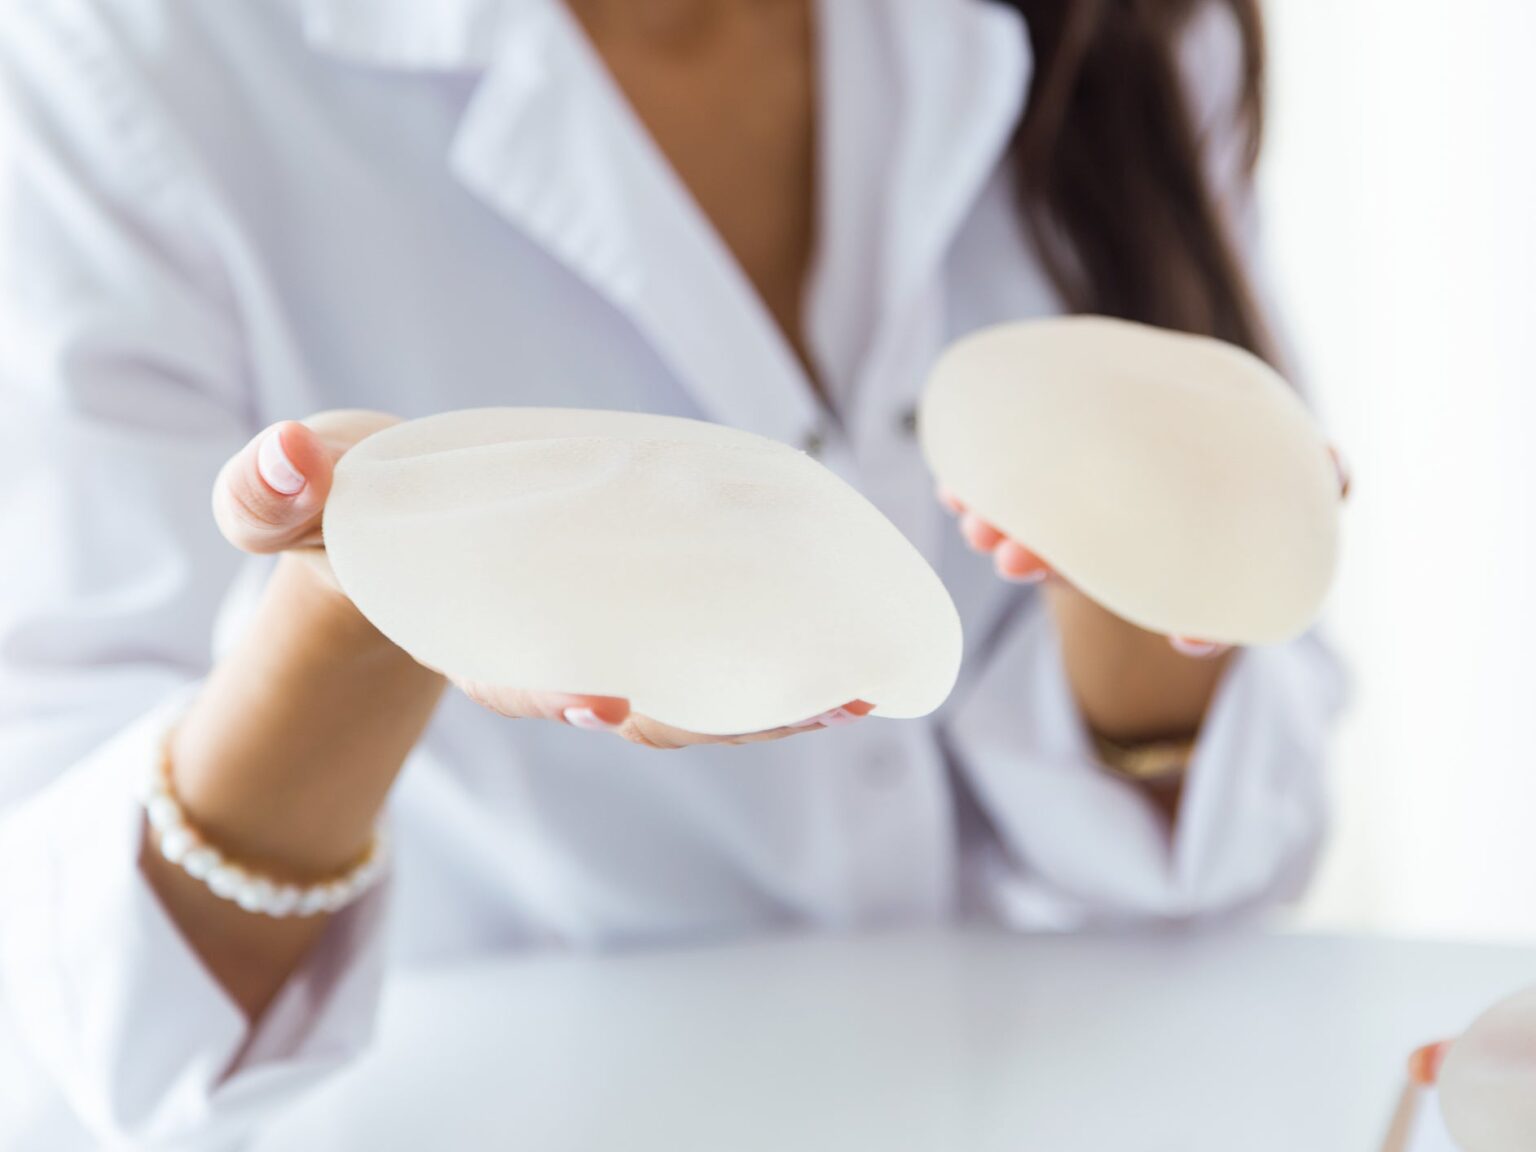 If you’ve ever considered getting breast implants then maybe you should wait. Could this illness be caused by an implant?